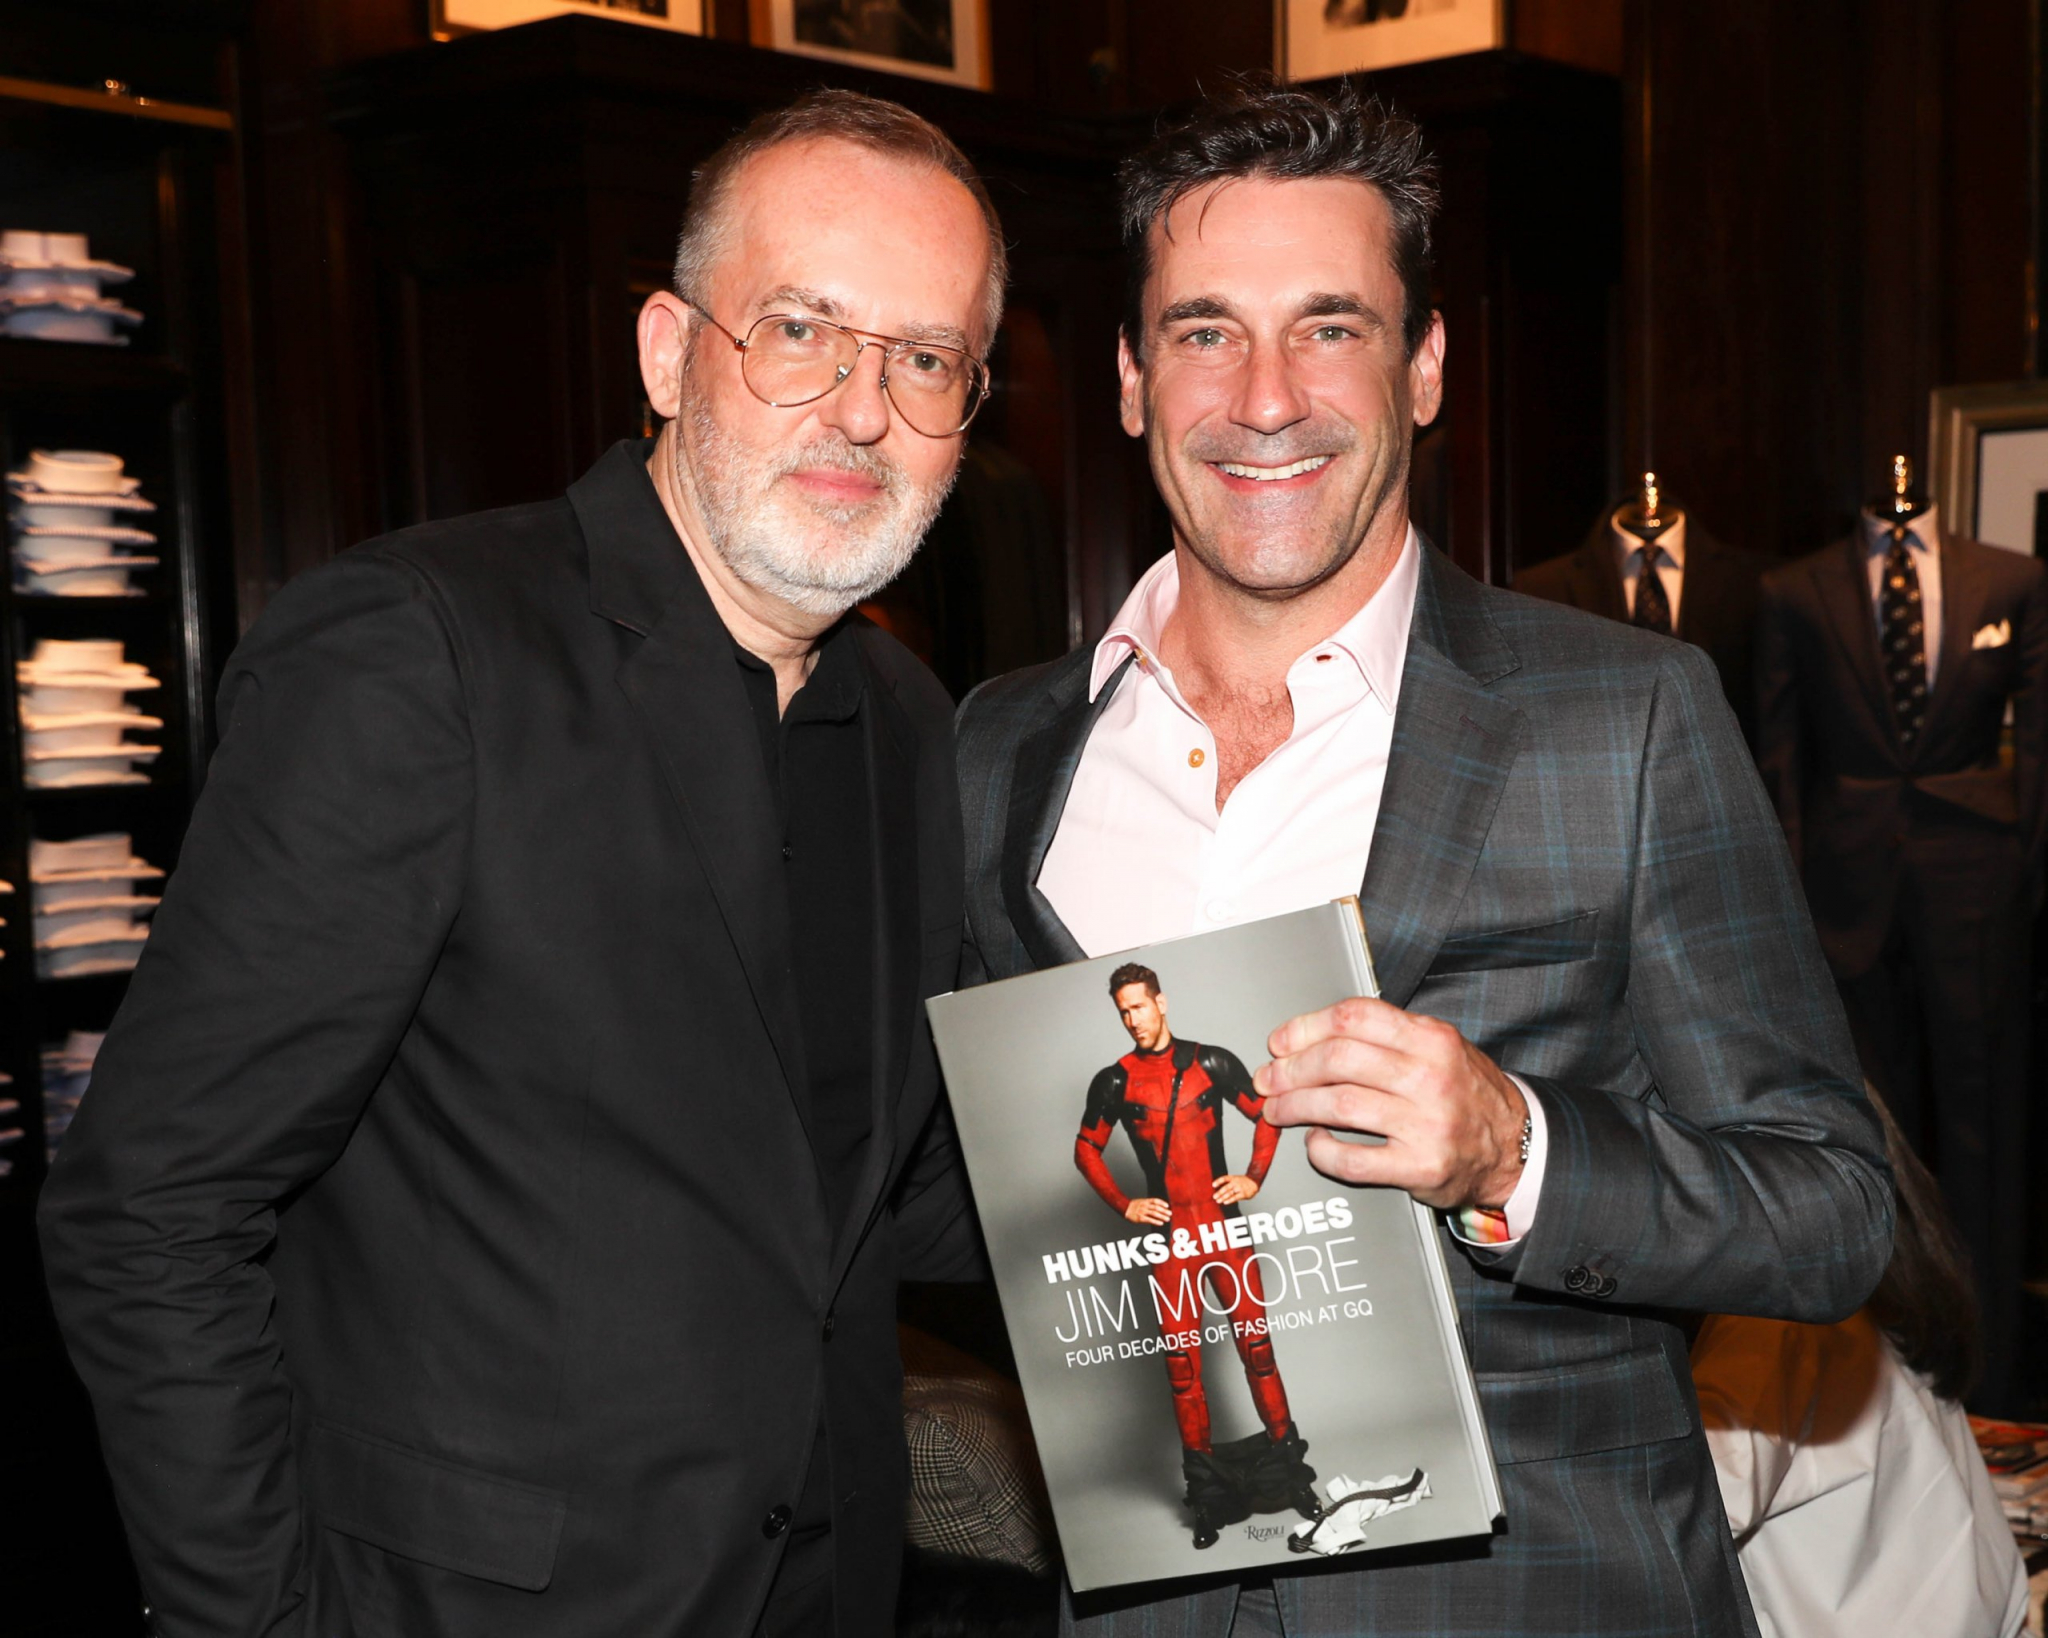 Jim Moore | Hunks & Heroes: Book Tour | Jim Moore and Jon Hamm at Ralph Lauren store, Chicago, IL | 4